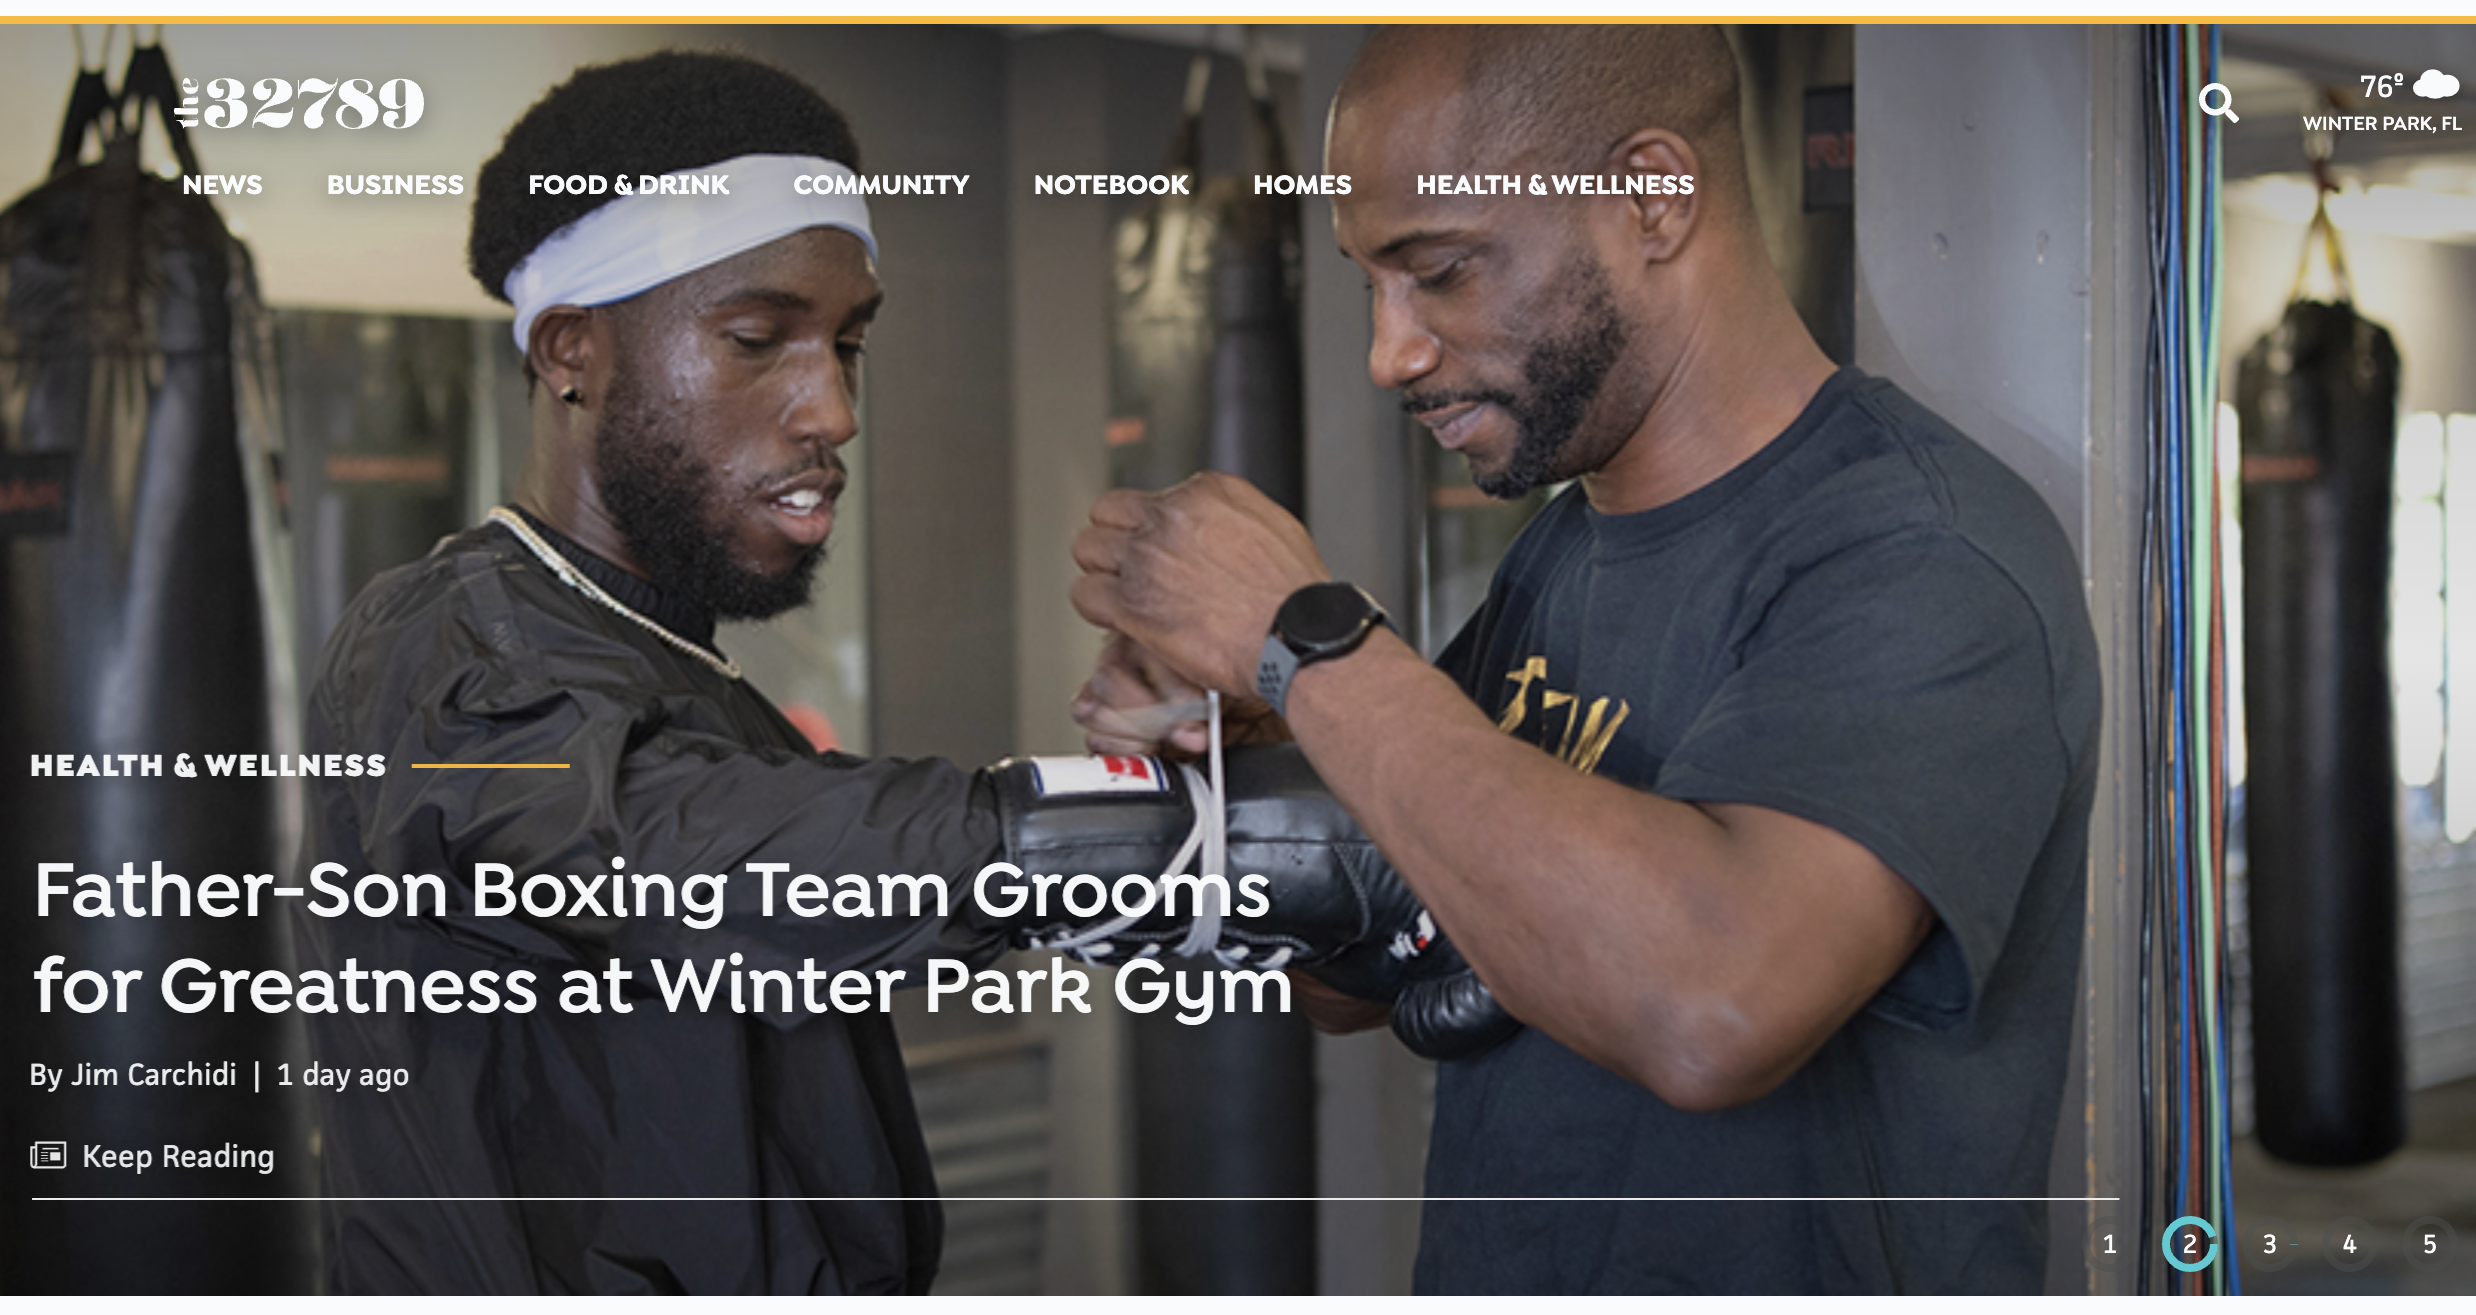 Father-Son Boxing Team Grooms for Greatness at Winter Park Gym